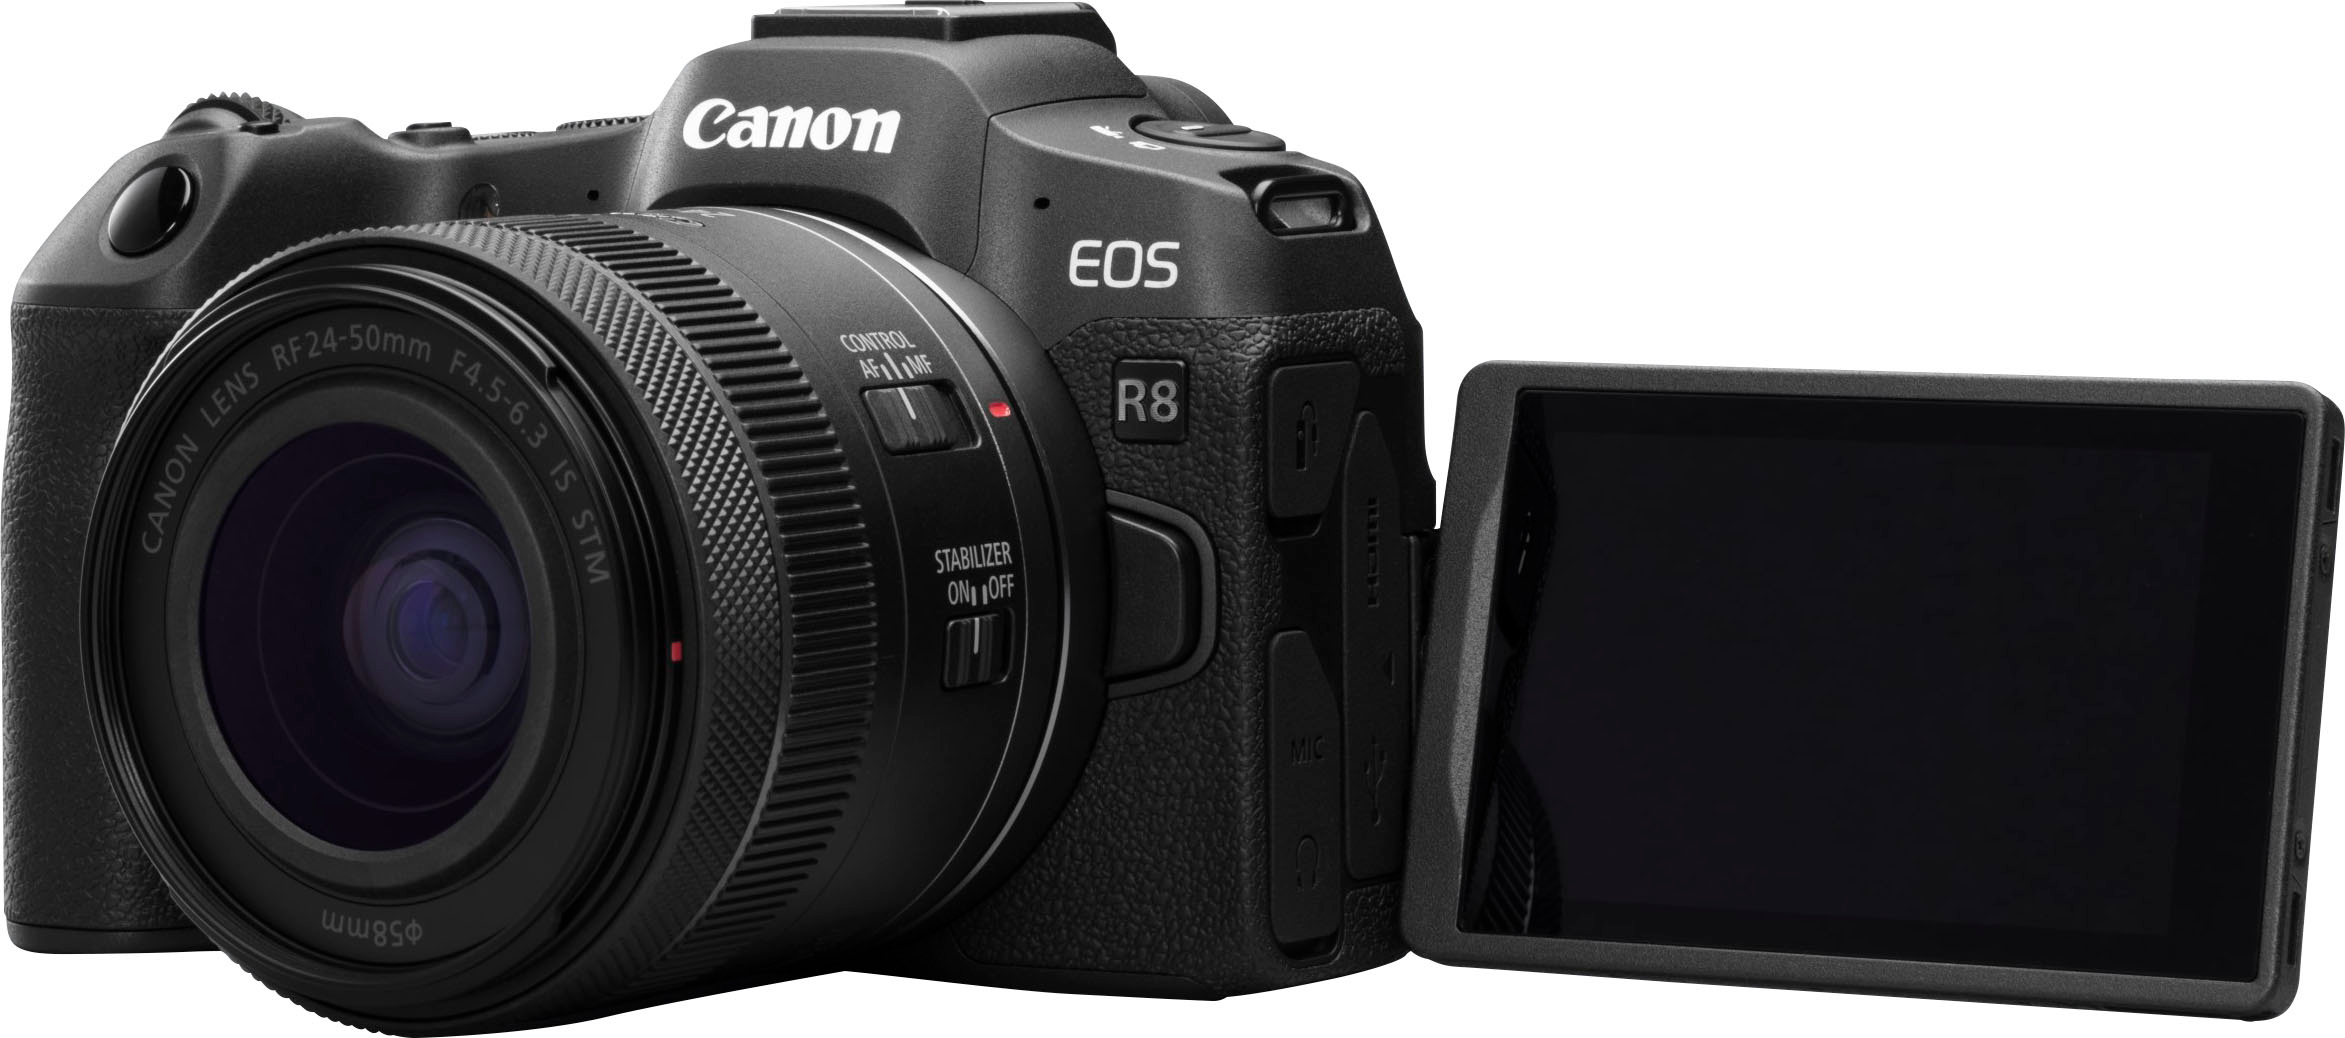 Best Buy: Canon EOS R8 4K Video Mirrorless Camera with RF 24-50mm